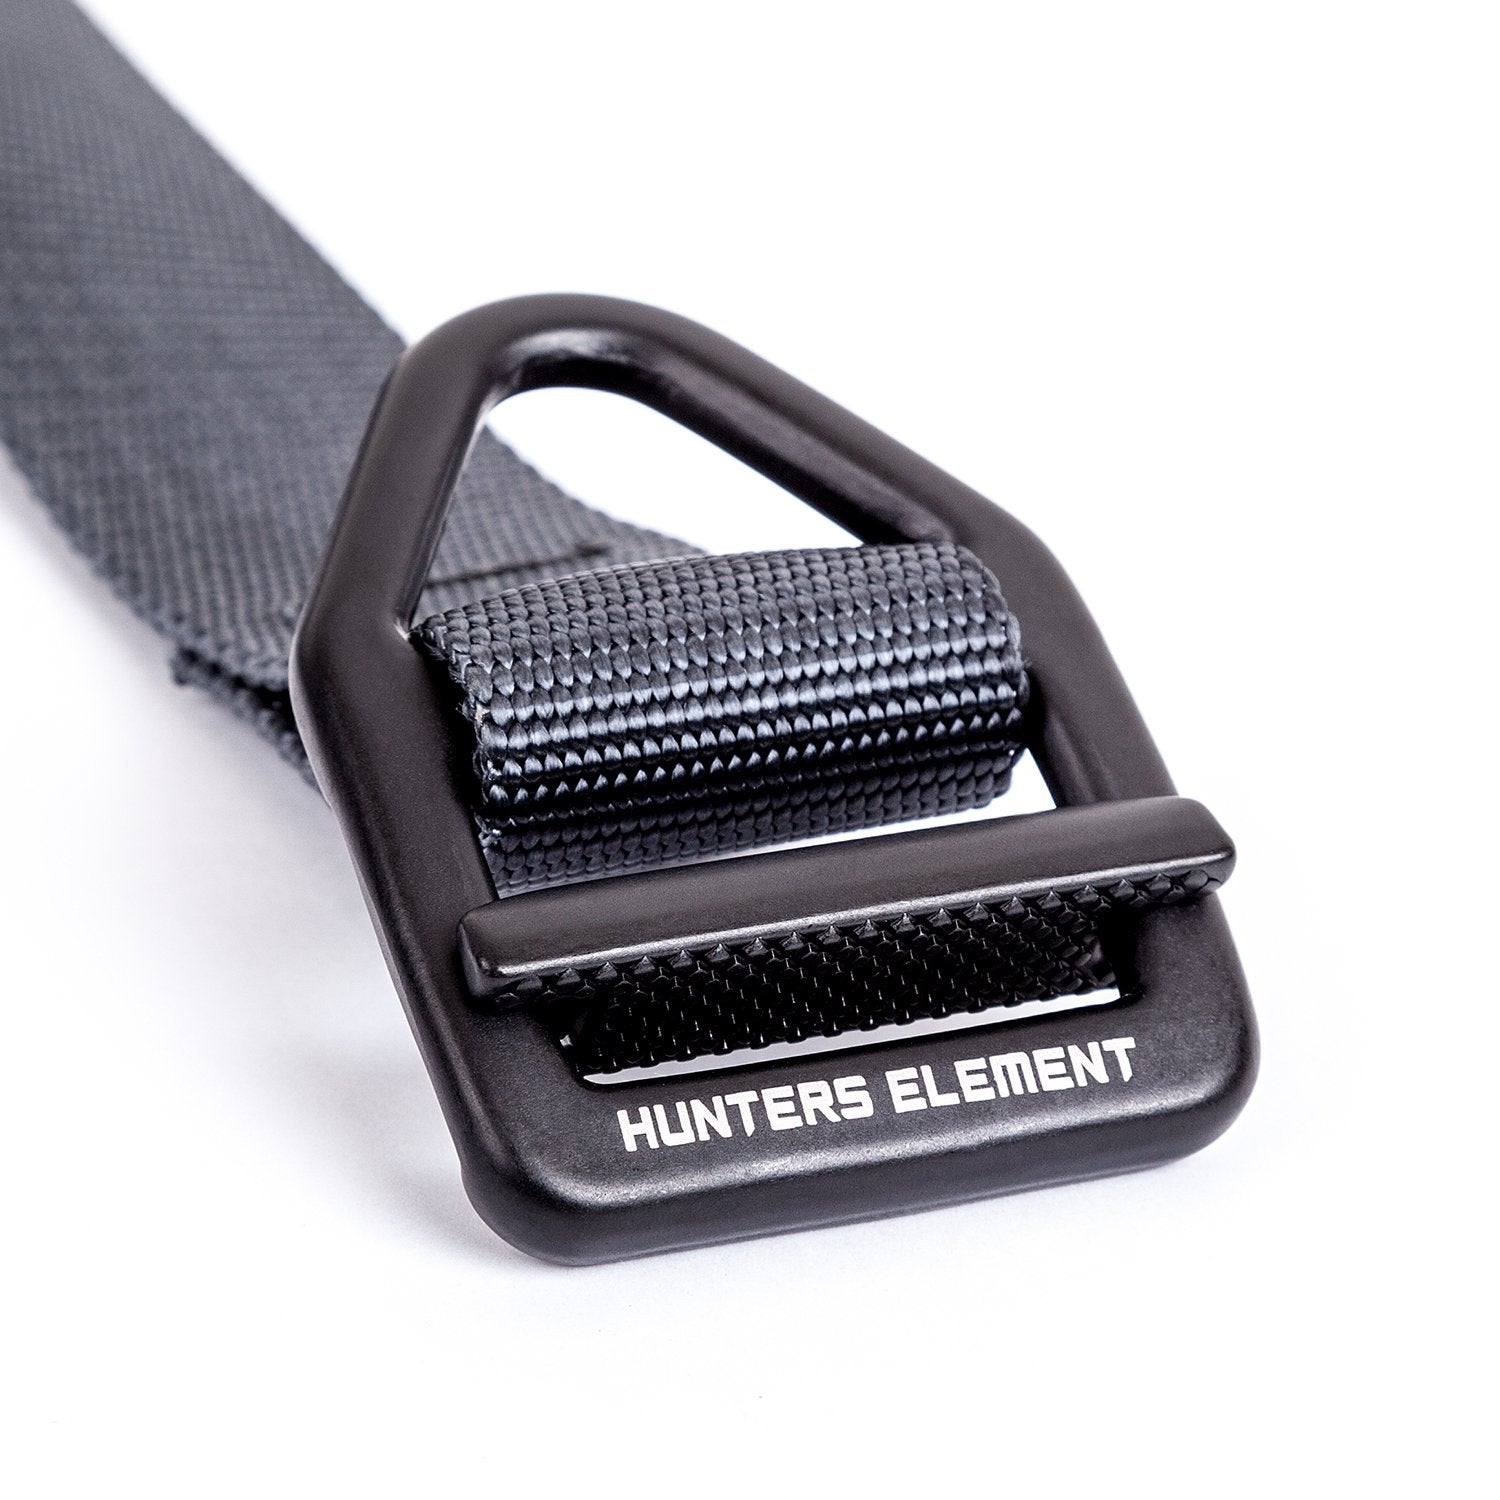 Hunters Element Torque Belt - Grey -  - Mansfield Hunting & Fishing - Products to prepare for Corona Virus